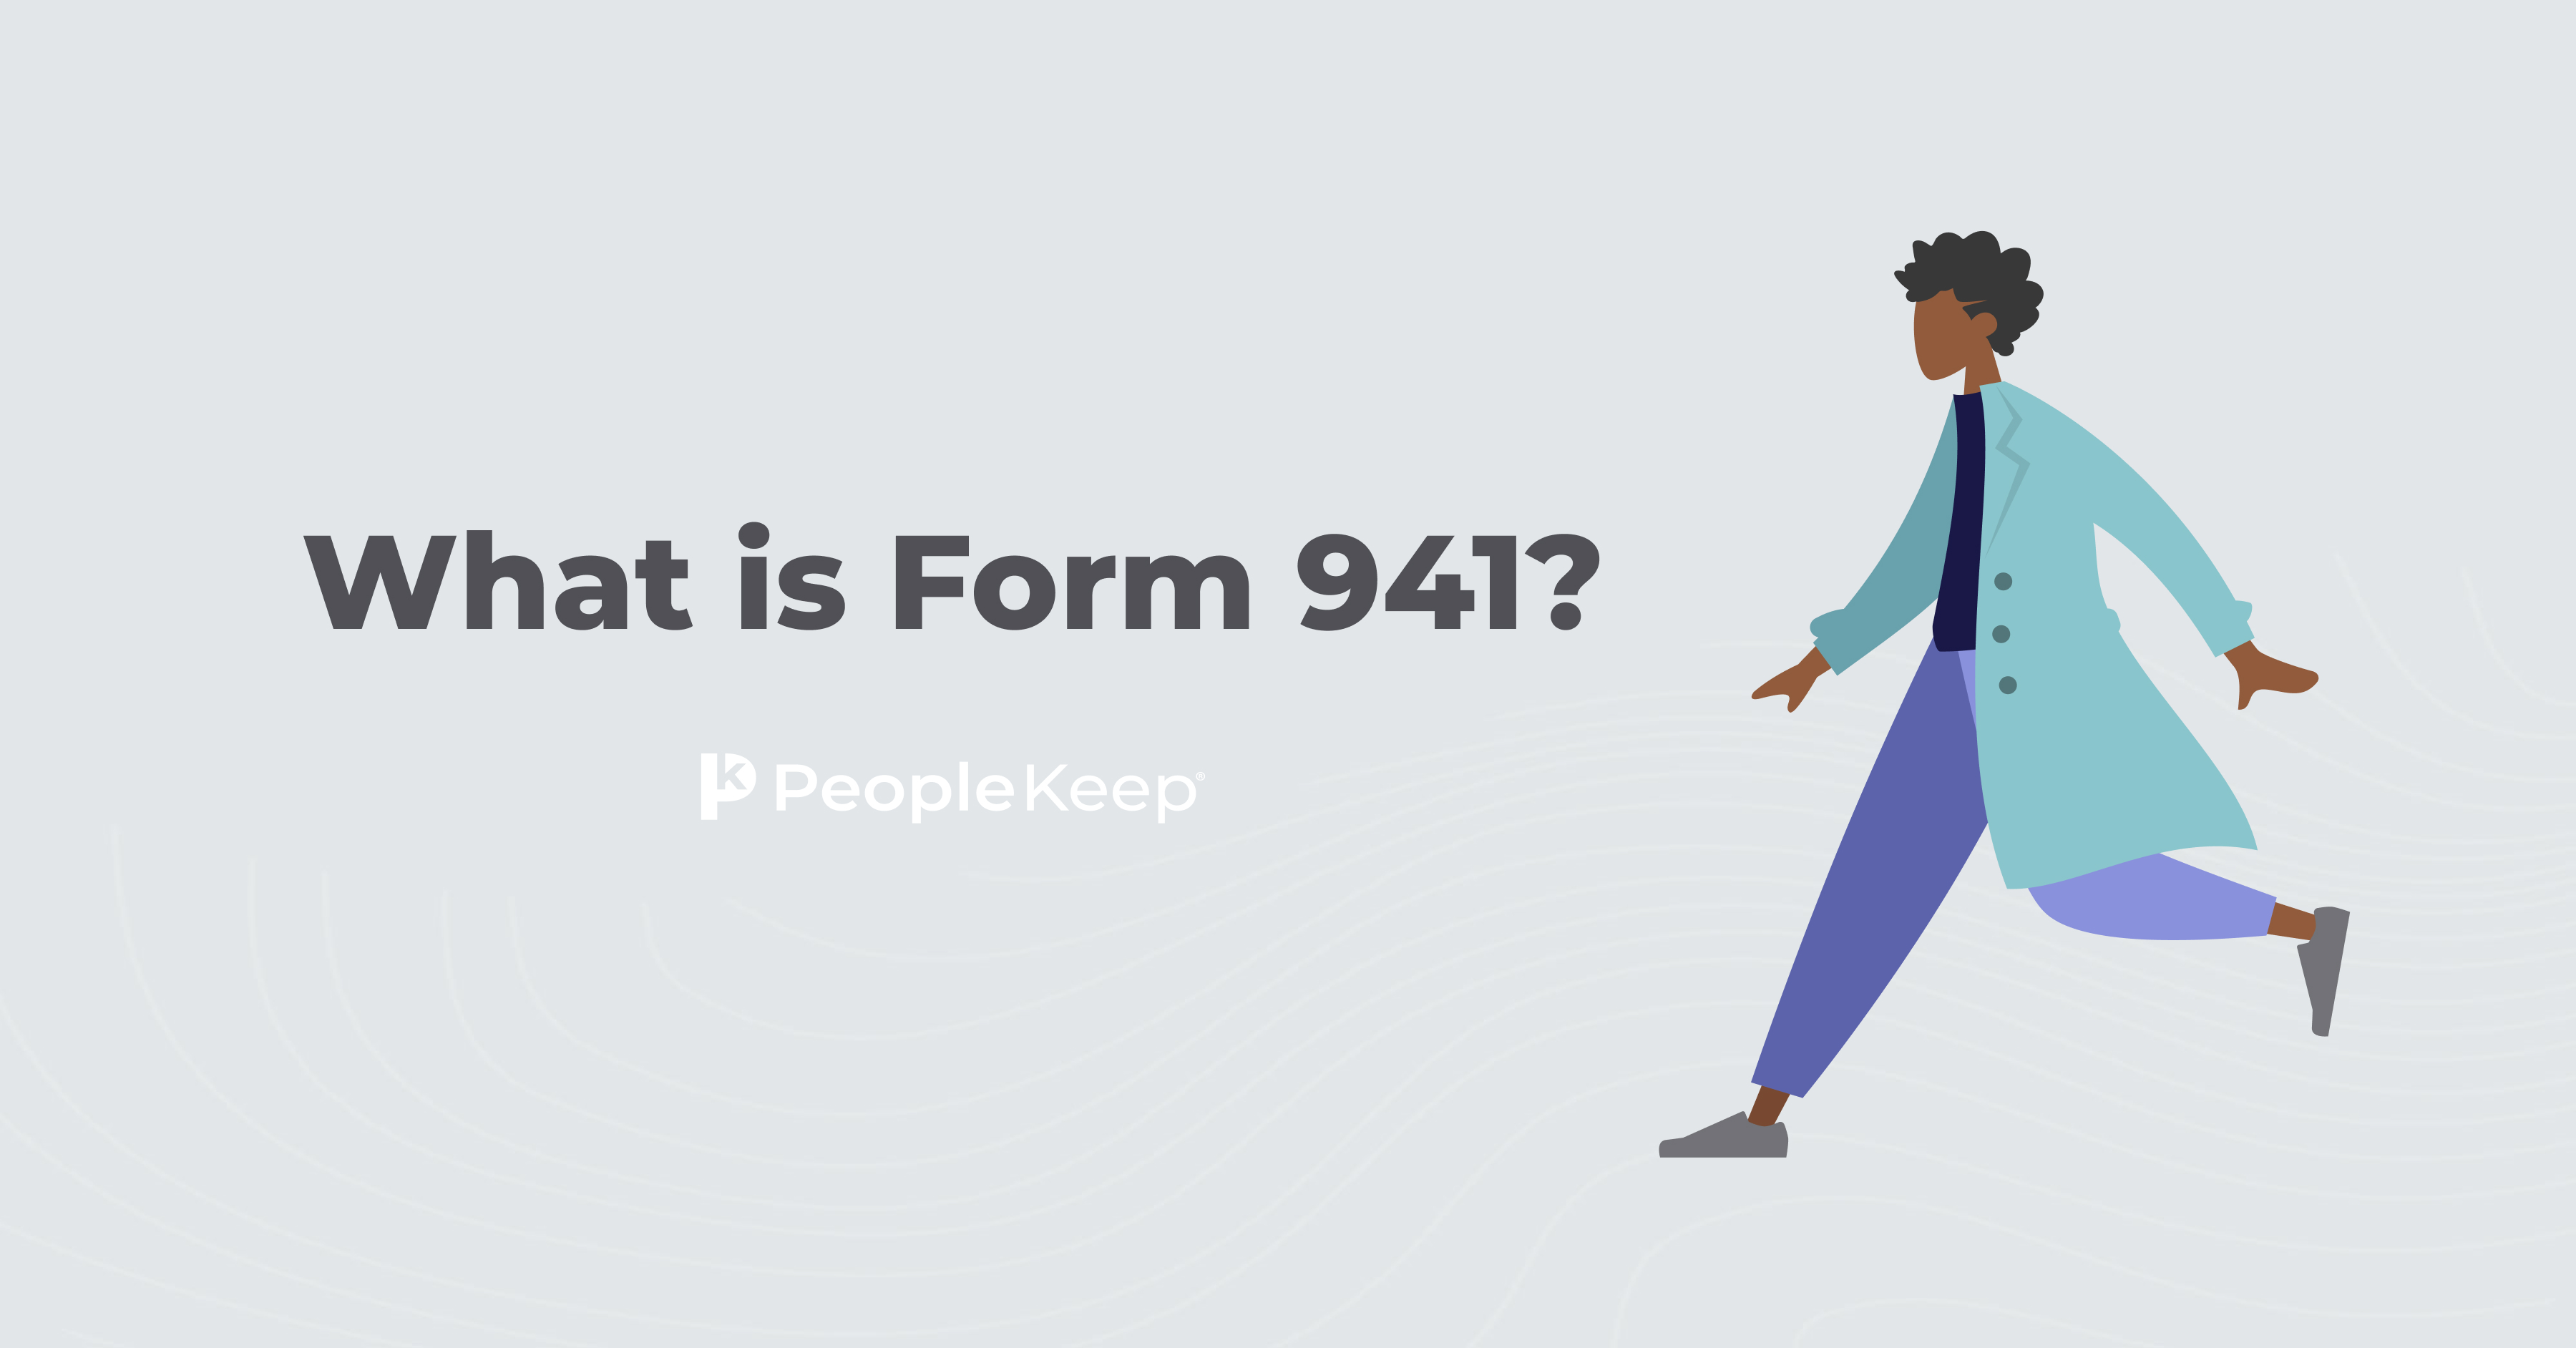 What is Form 941?